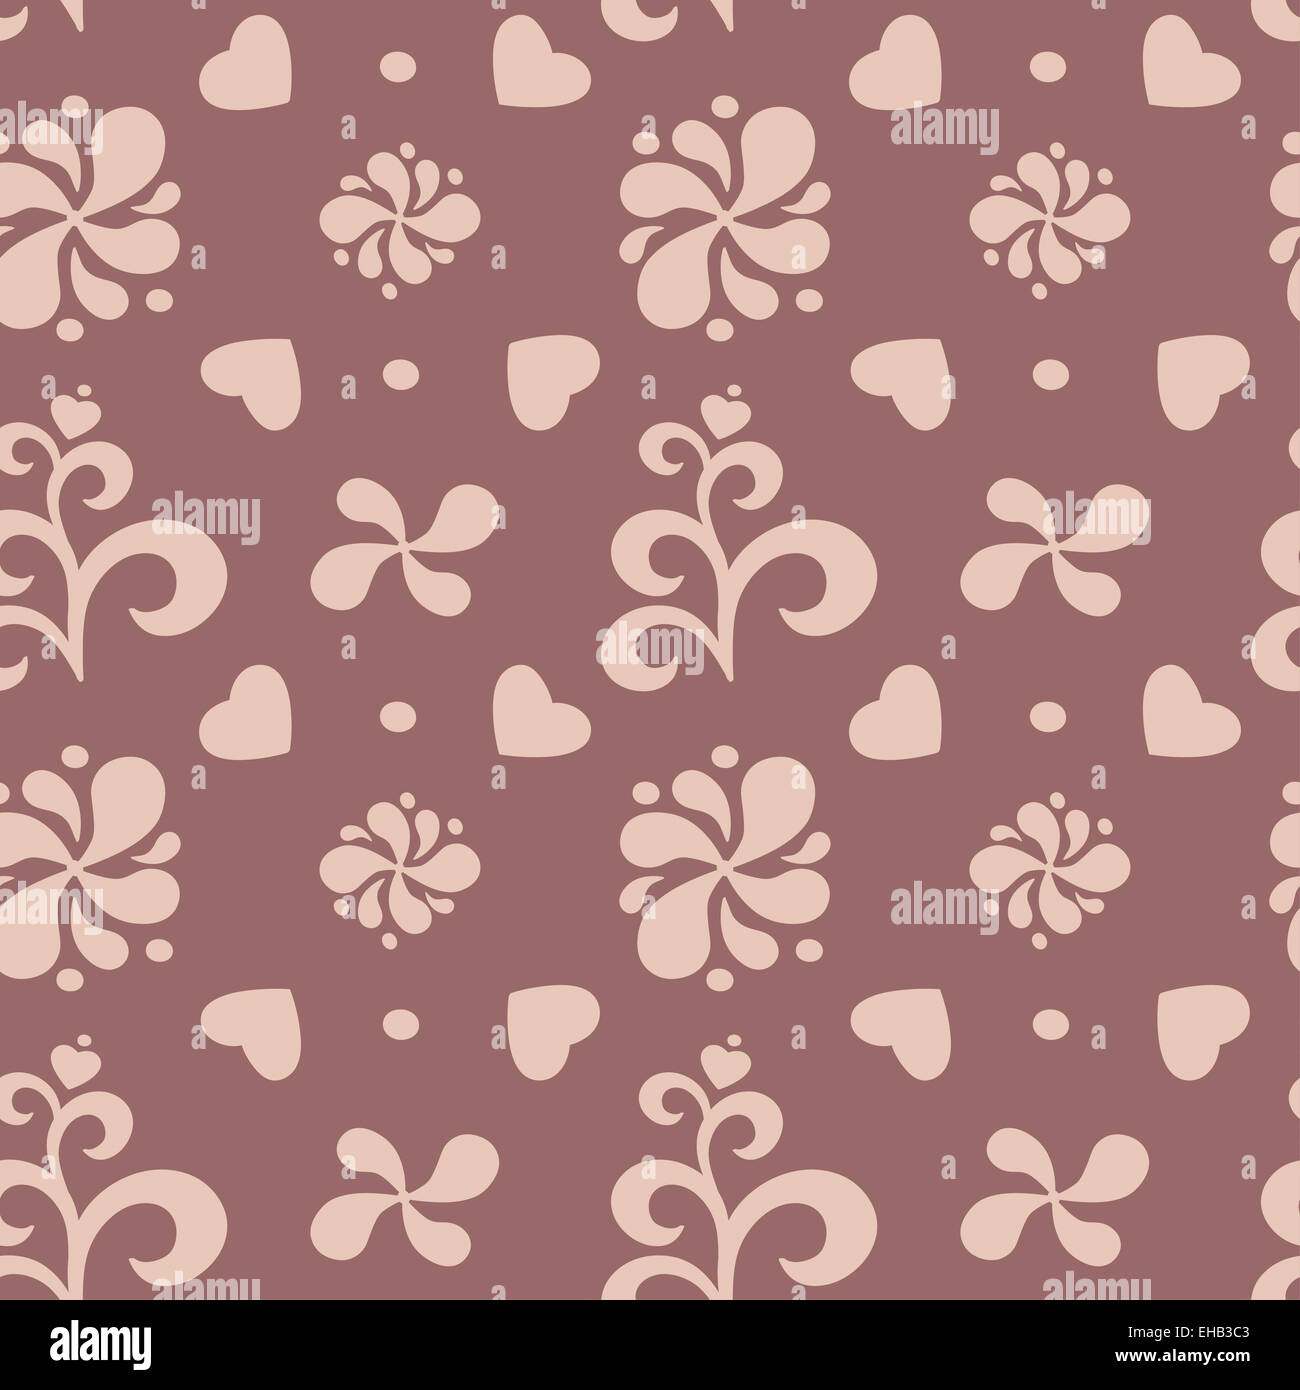 Abstract floral seamless pattern on brown background. Stock Photo